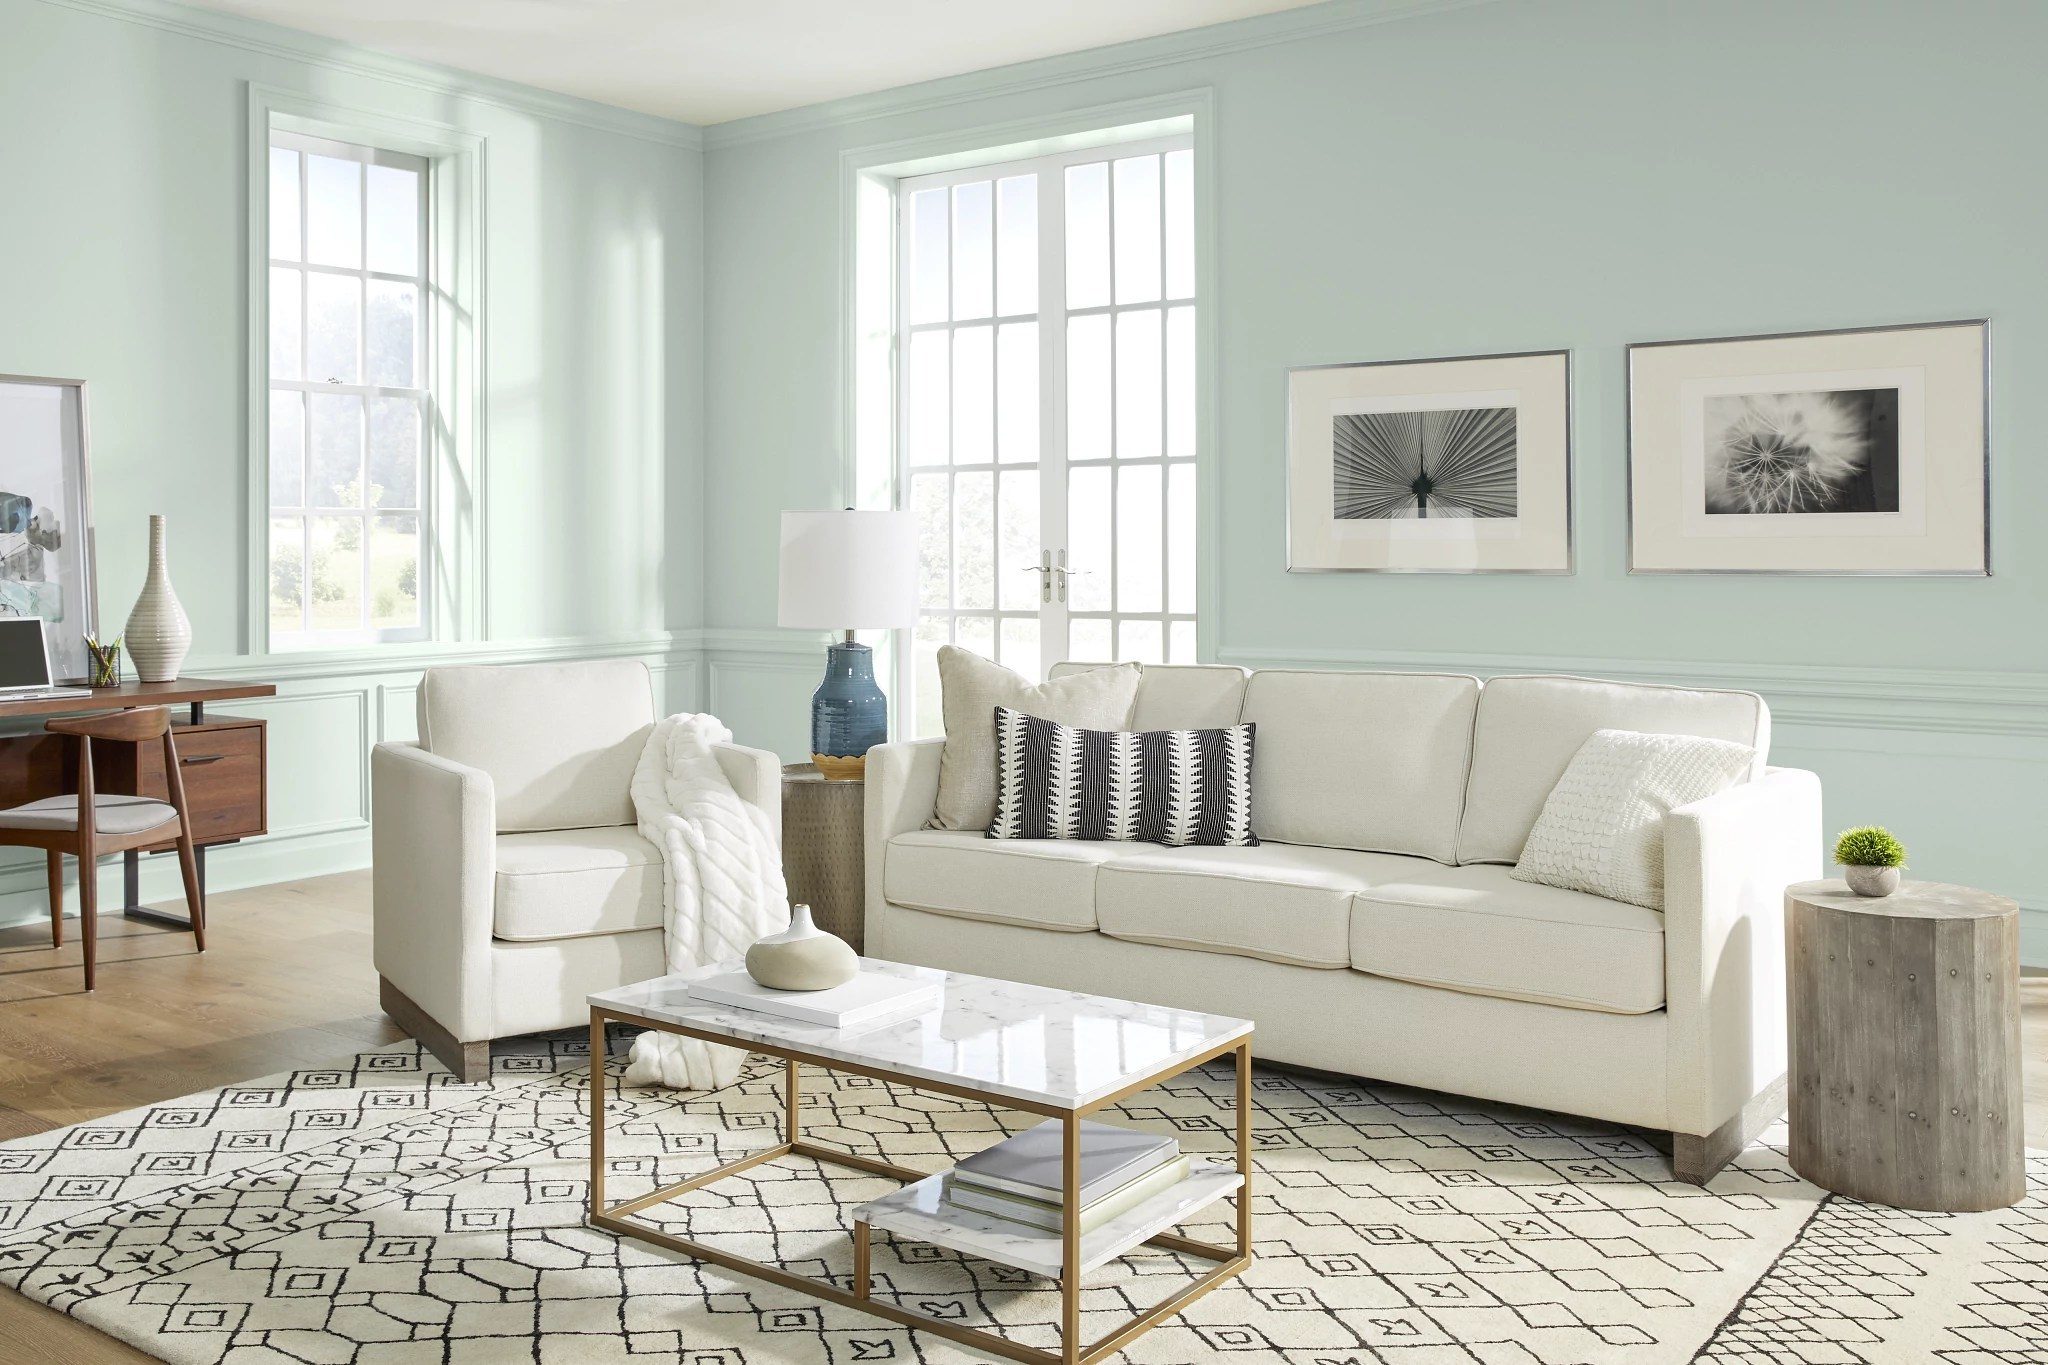 7 Por Paint Colors For The Living Room